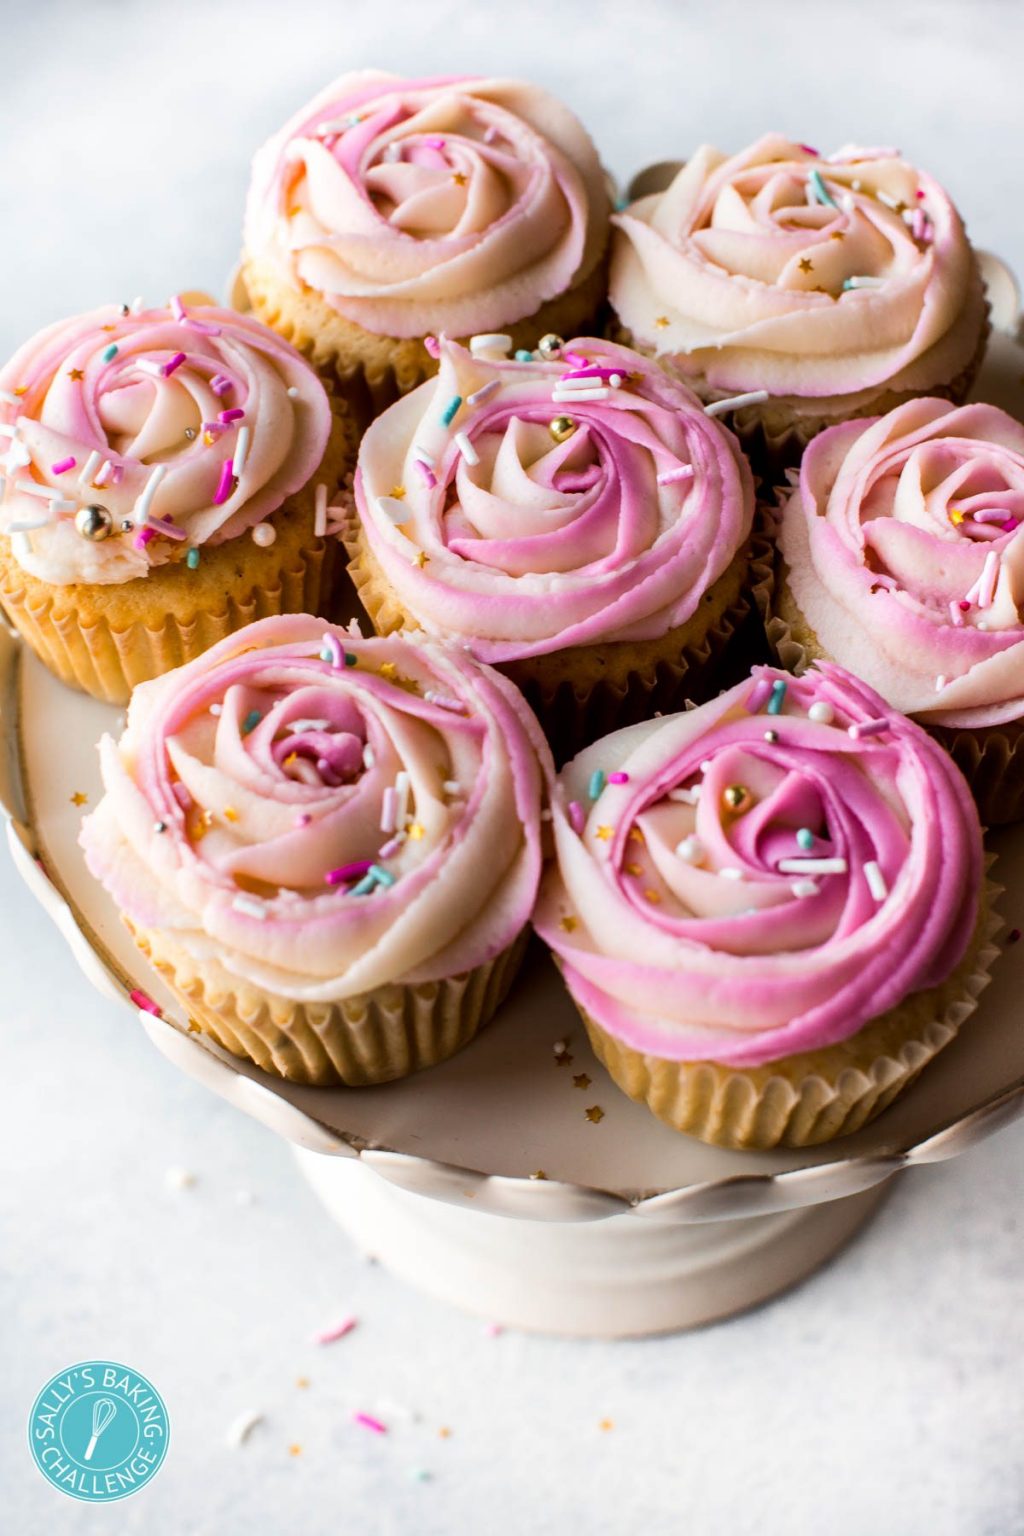 Delicious Frosting and Icing Recipes